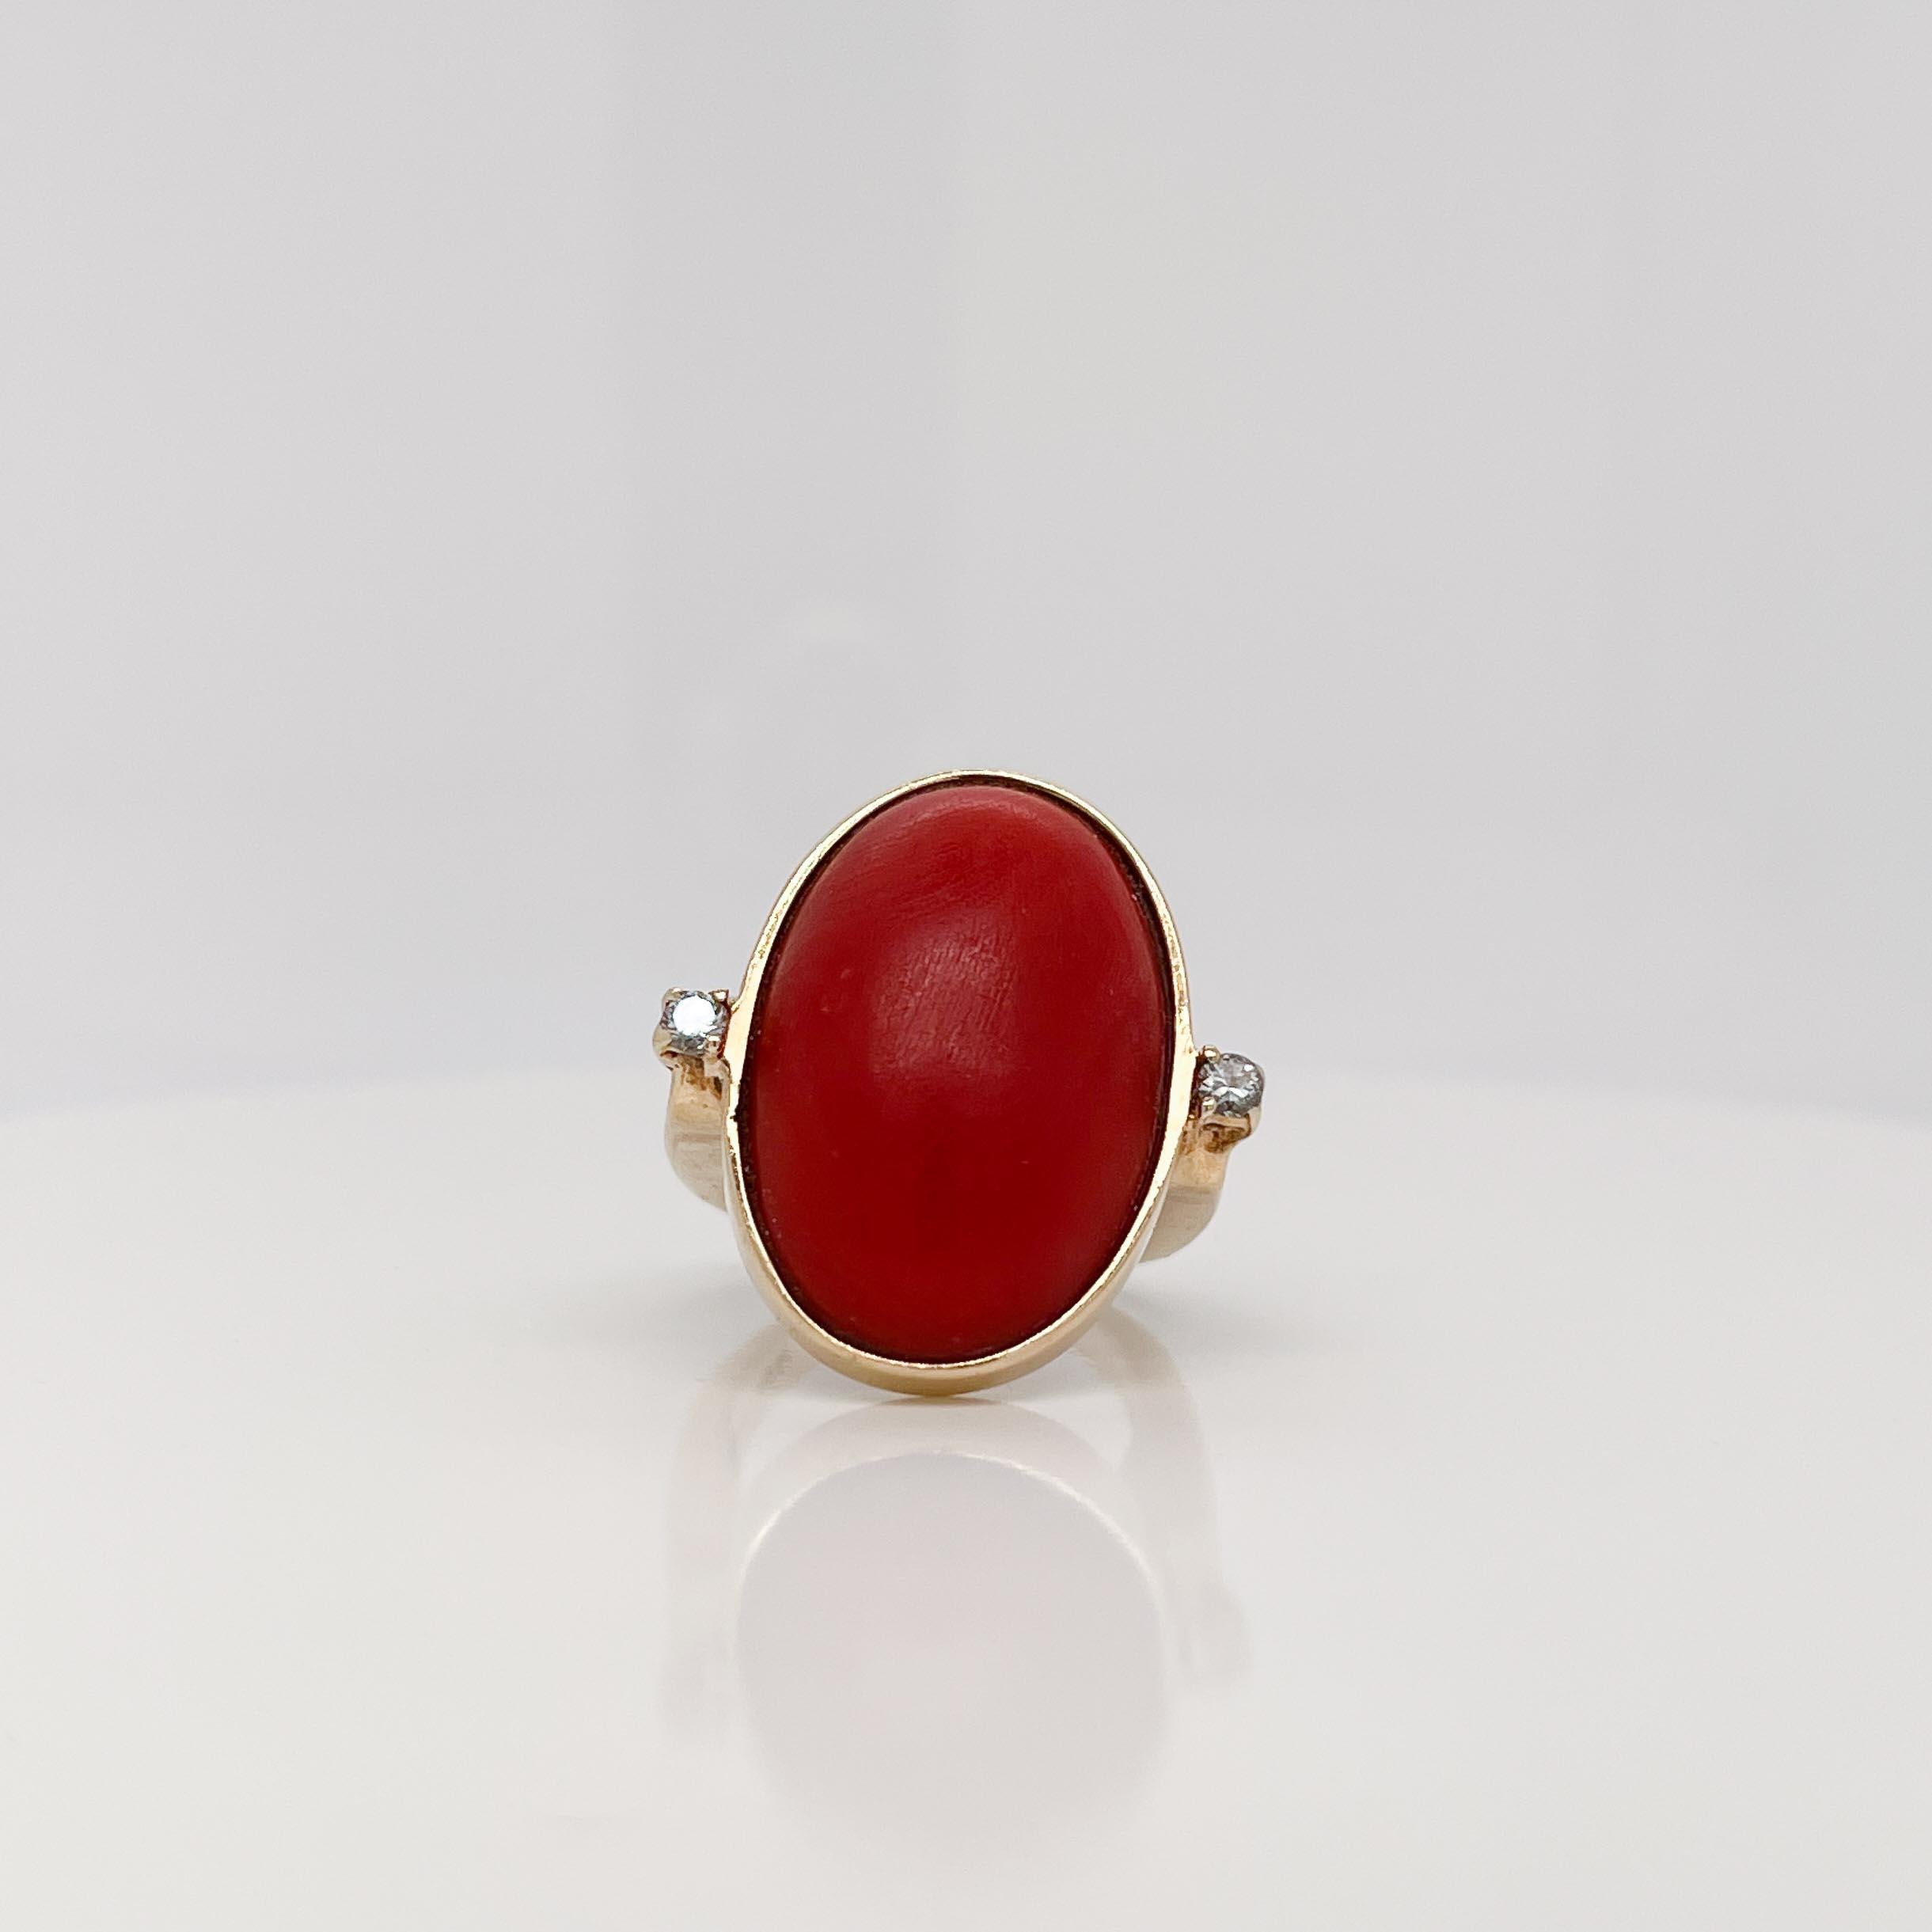 A fine Retro gold and coral signet ring.

With a large coral cabochon at the center of 14k gold setting that is flanked by two prong set round brilliant diamonds. 

The square band has open work on both sides.

Simply a great Retro signet-style